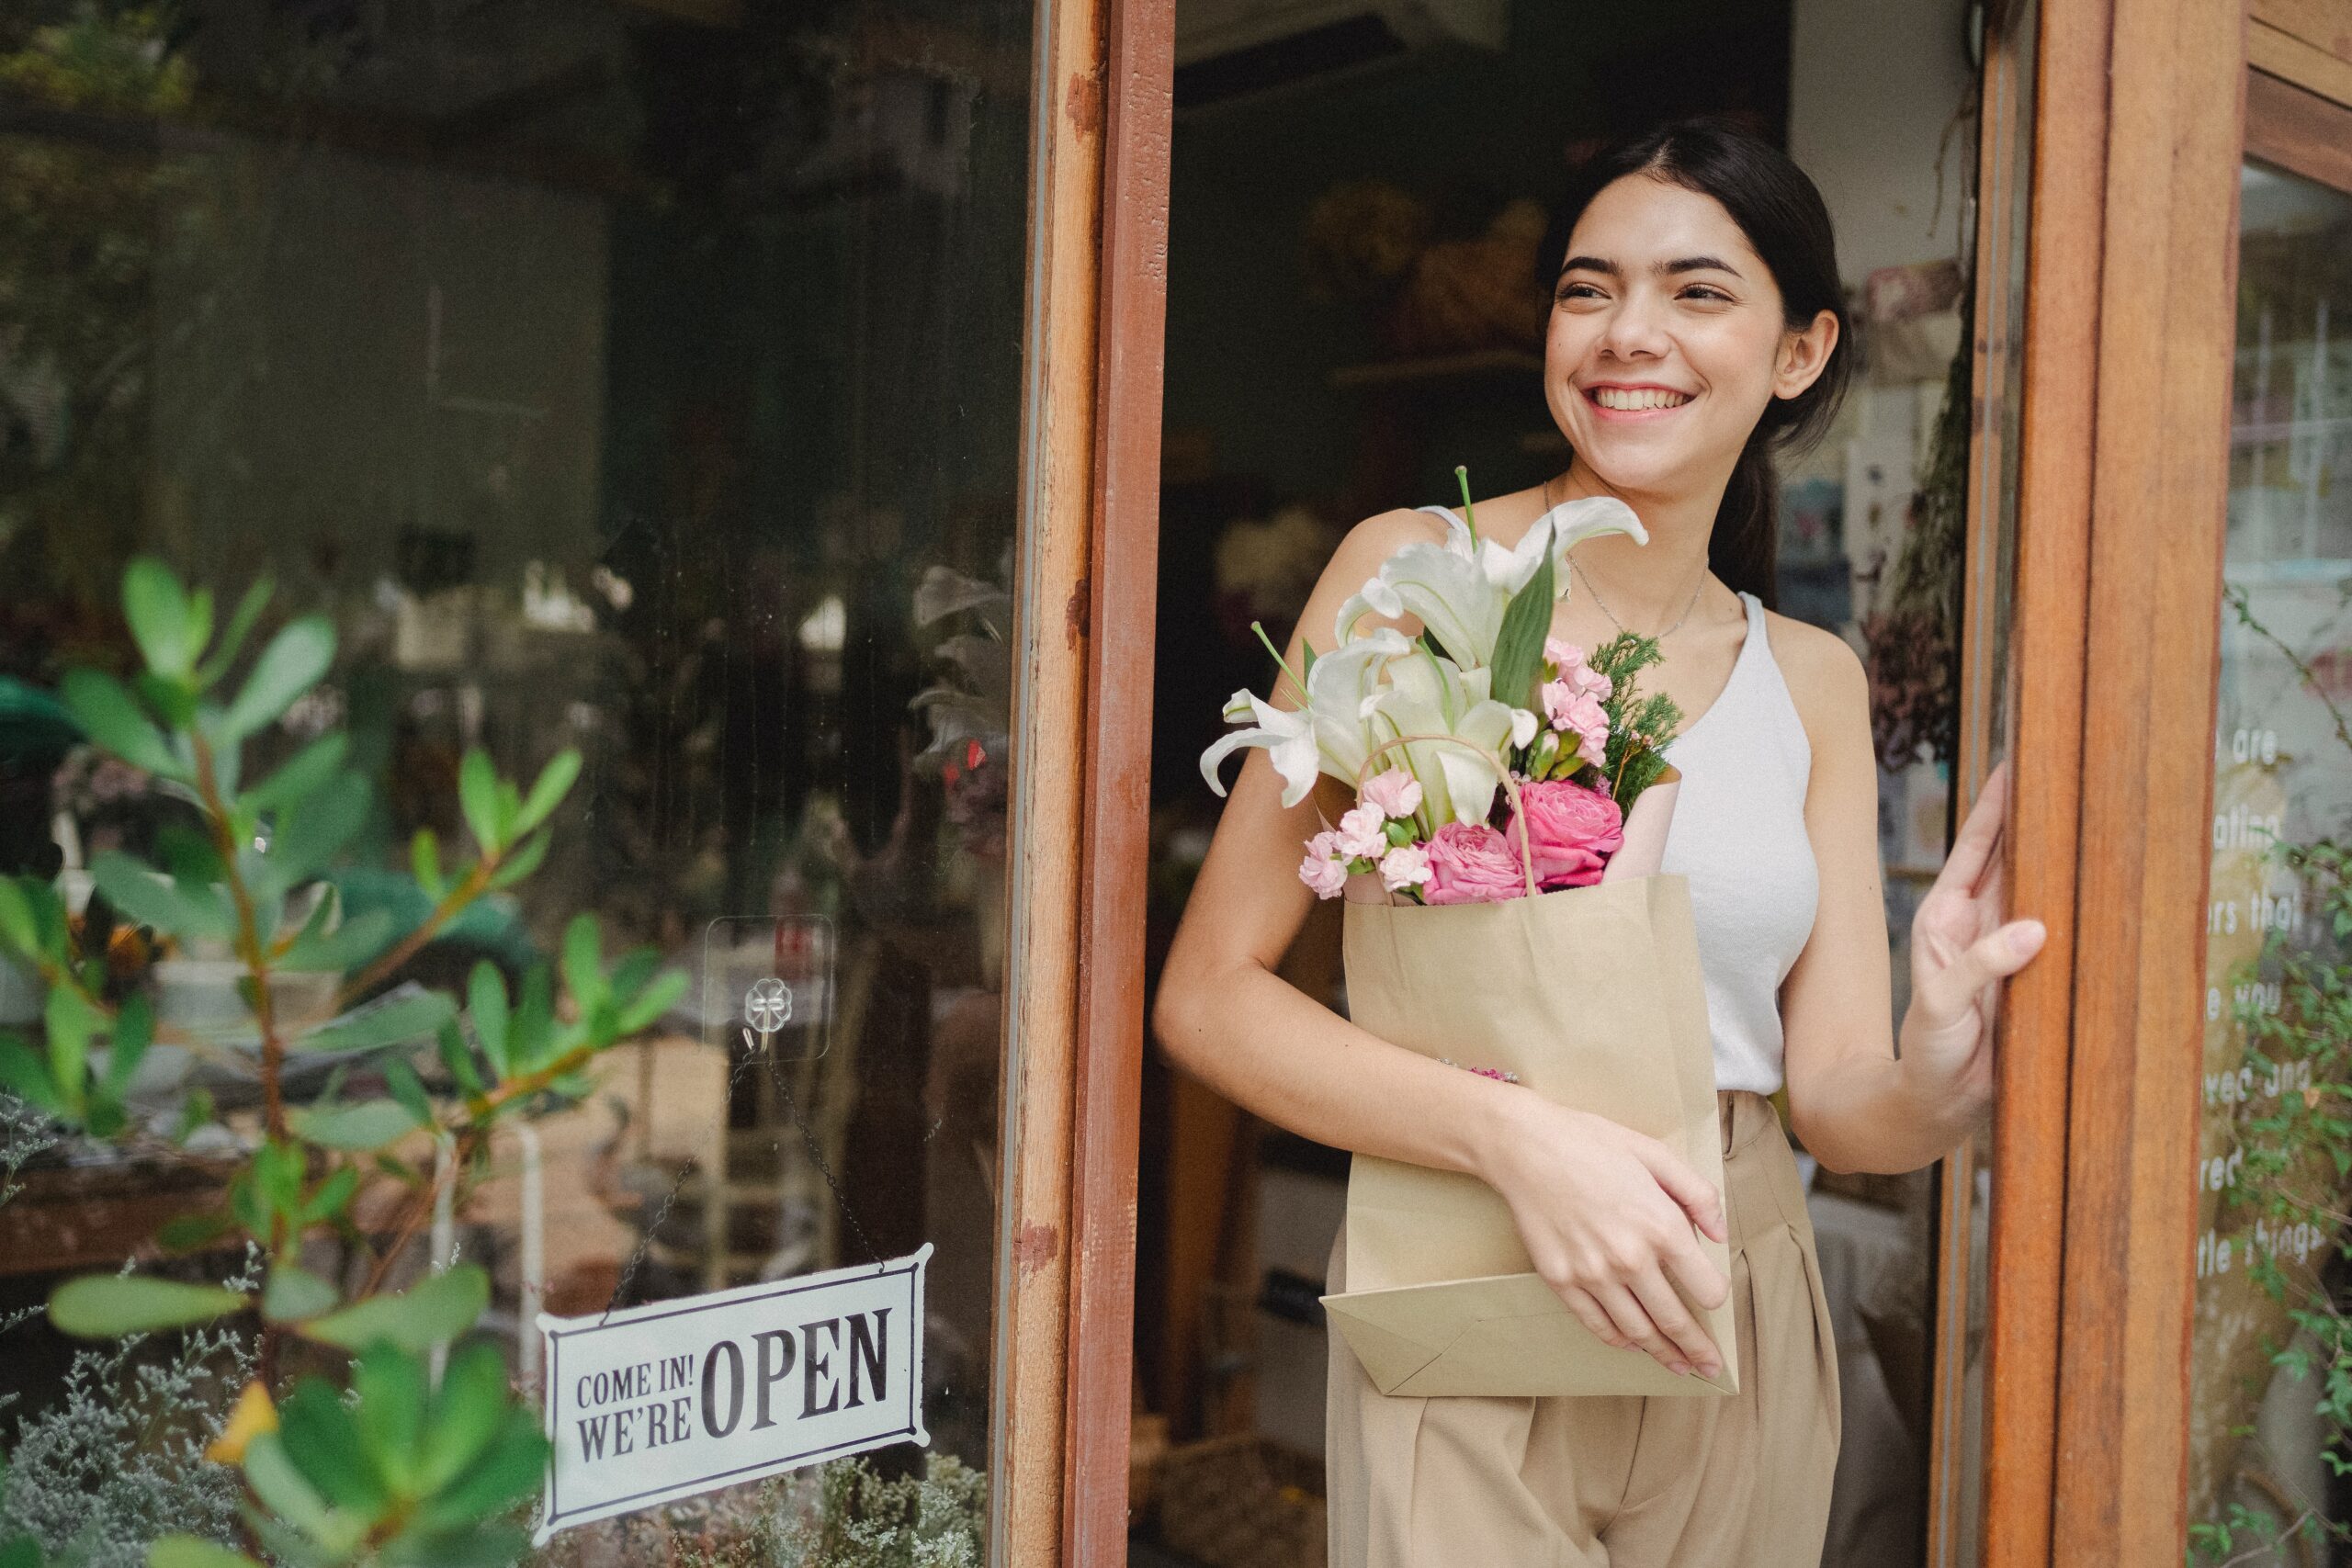 woman standing at the door of a store with an Open sign, smiling and holding a bag of flowers